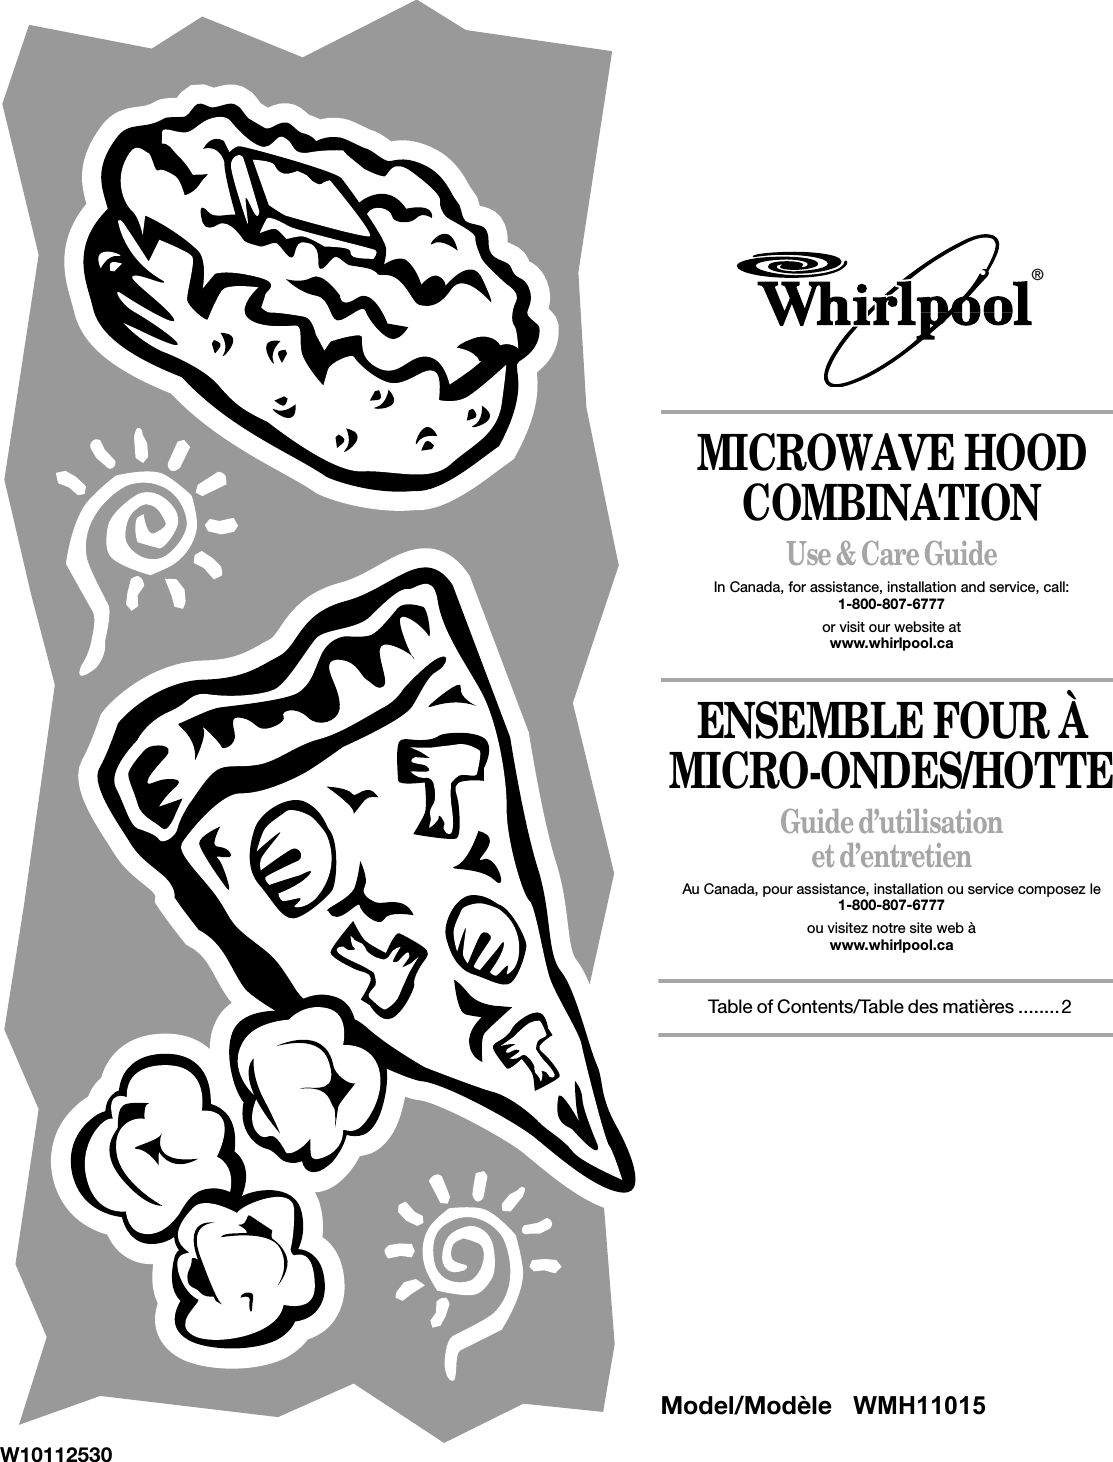 MICROWAVE HOOD COMBINATIONUse &amp; Care GuideIn Canada, for assistance, installation and service, call: 1-800-807-6777or visit our website at www.whirlpool.caENSEMBLE FOUR À MICRO-ONDES/HOTTEGuide d’utilisation et d’entretienAu Canada, pour assistance, installation ou service composez le 1-800-807-6777ou visitez notre site web àwww.whirlpool.caTable of Contents/Table des matières ........2W10112530®Model/Modèle   WMH11015